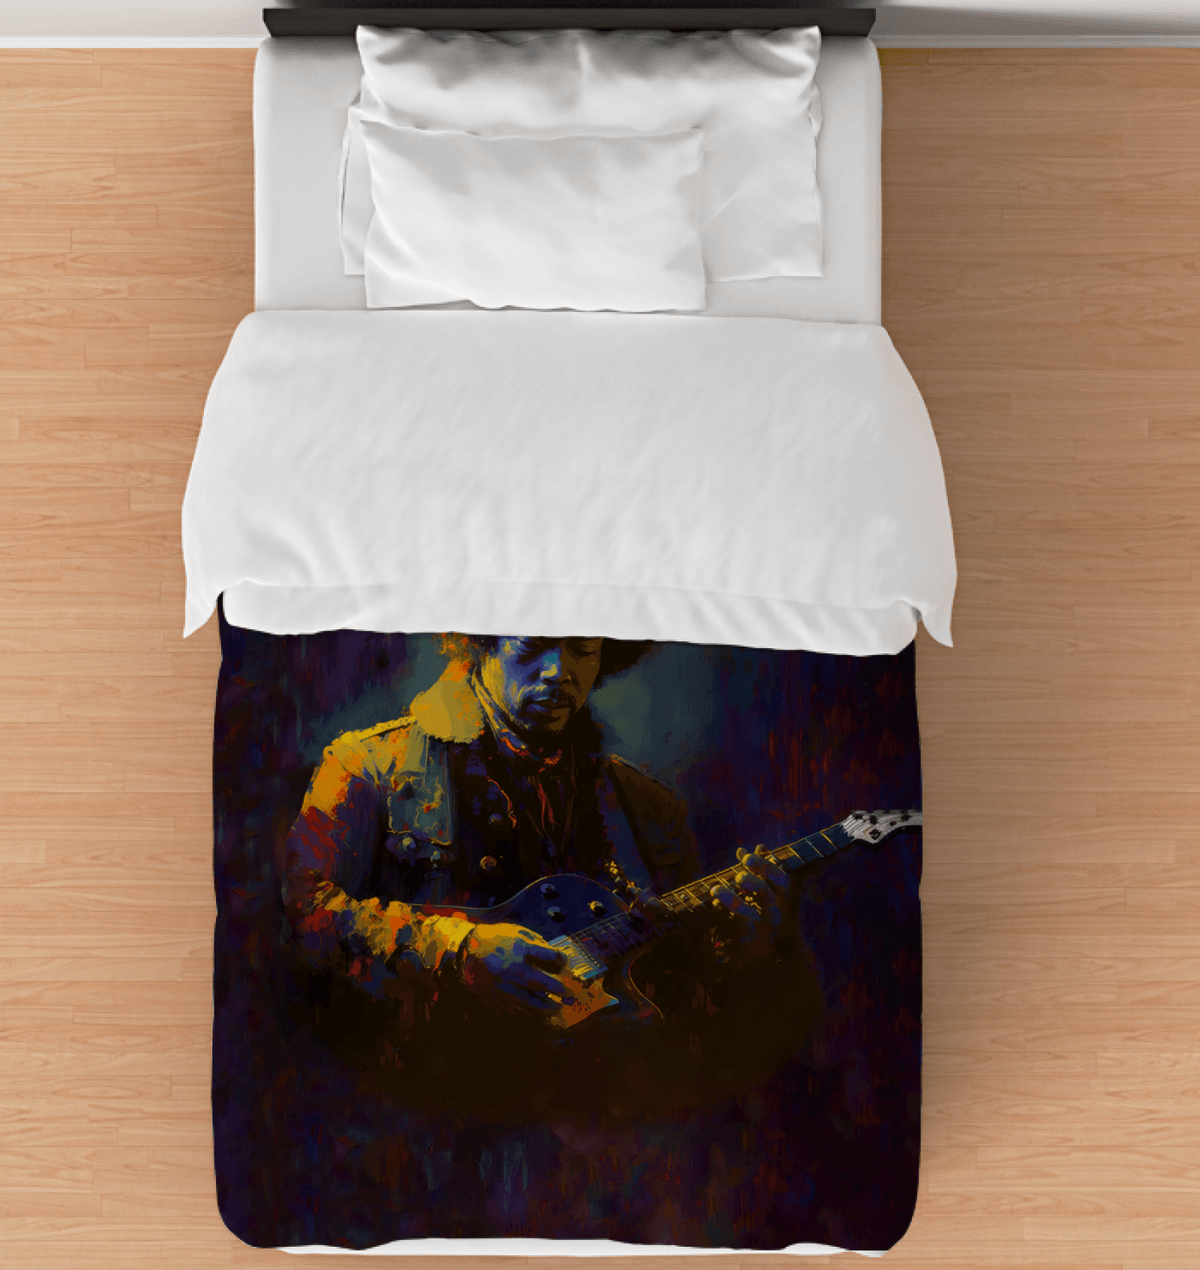 Jazzed Up Notes Bedding Set - Beyond T-shirts